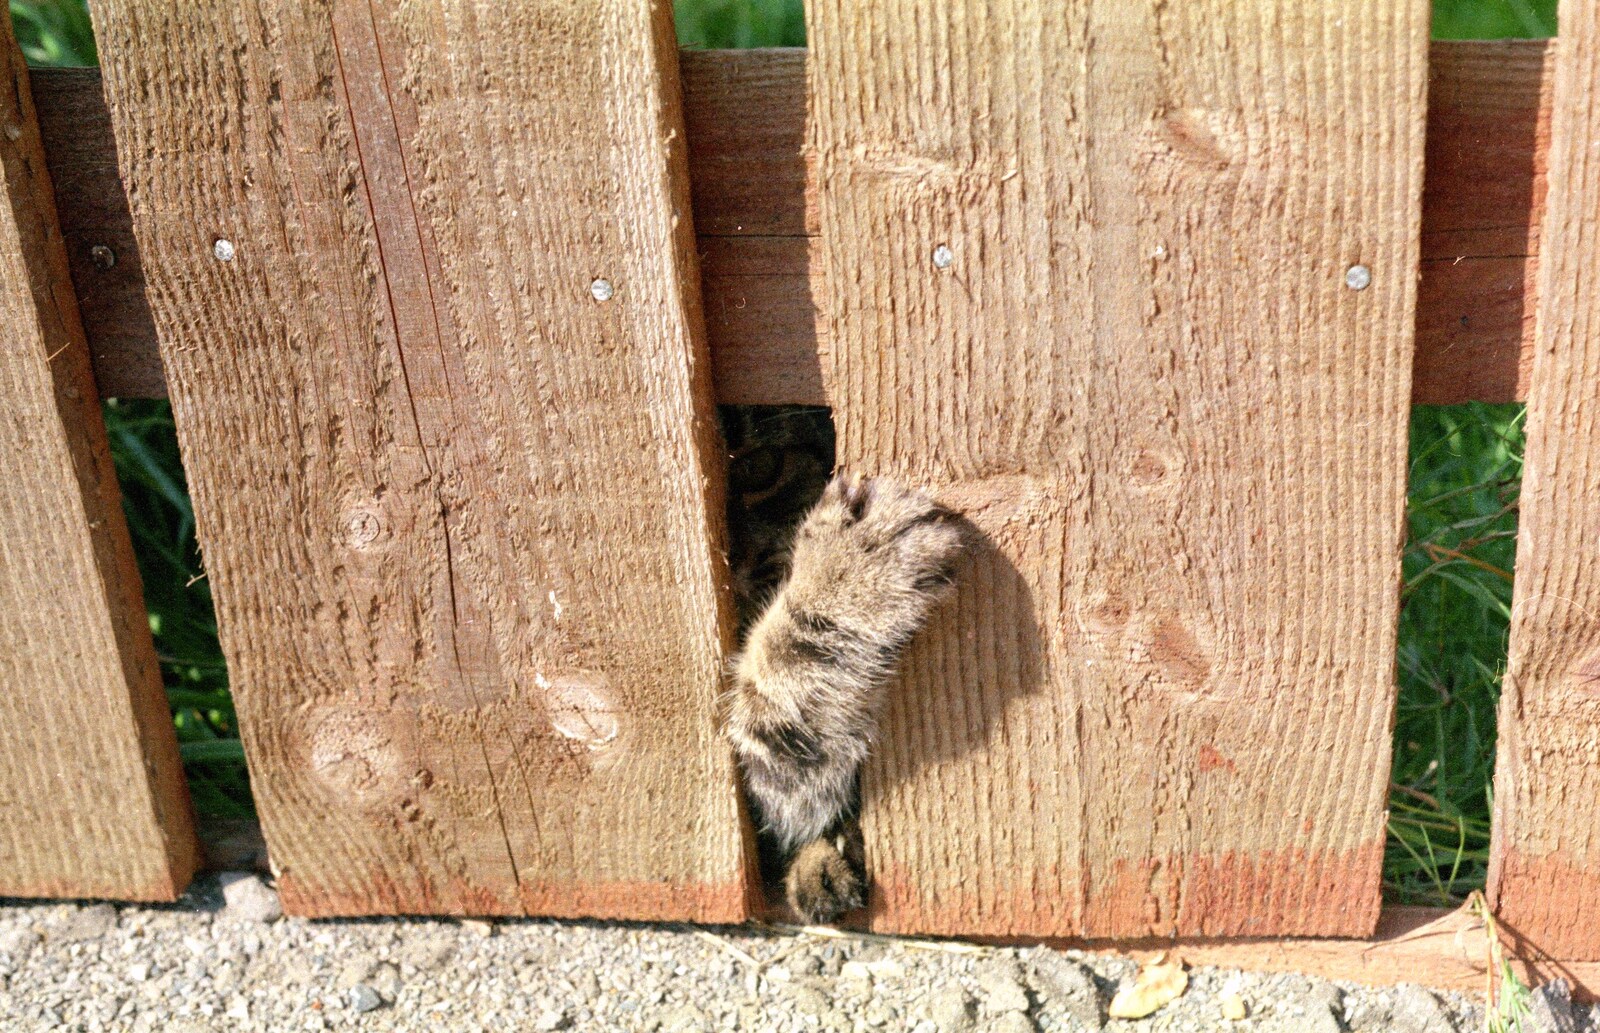 Florence's paw pokes through a fence from Harvester Way Randomness, Lymington, Hampshire - 19th July 1986